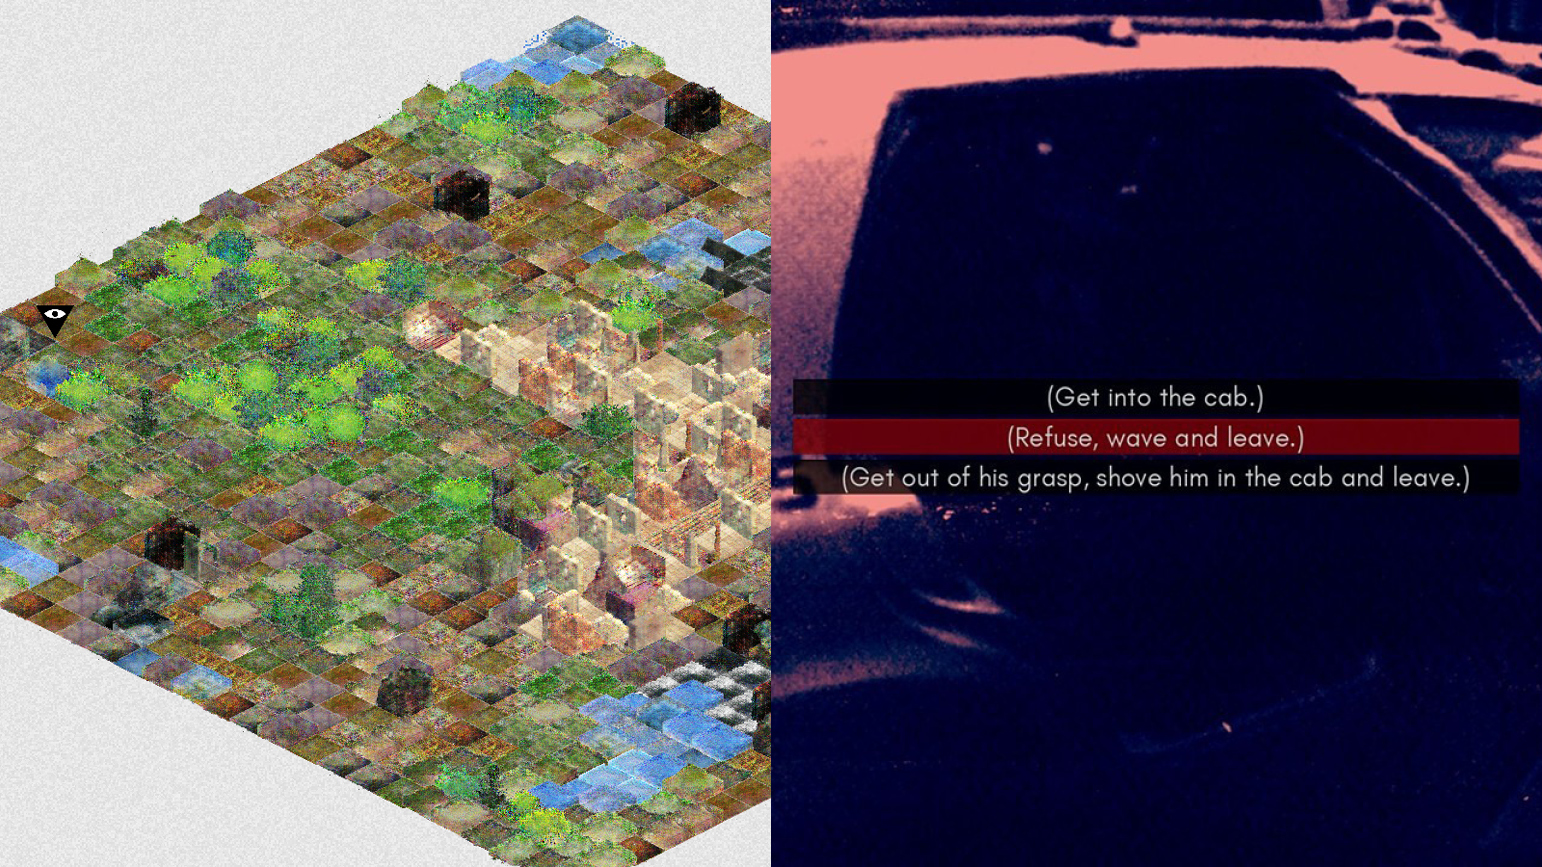 Two stills from video games, one showing digital terrain floating against a white background and the other a stylized image of a taxi